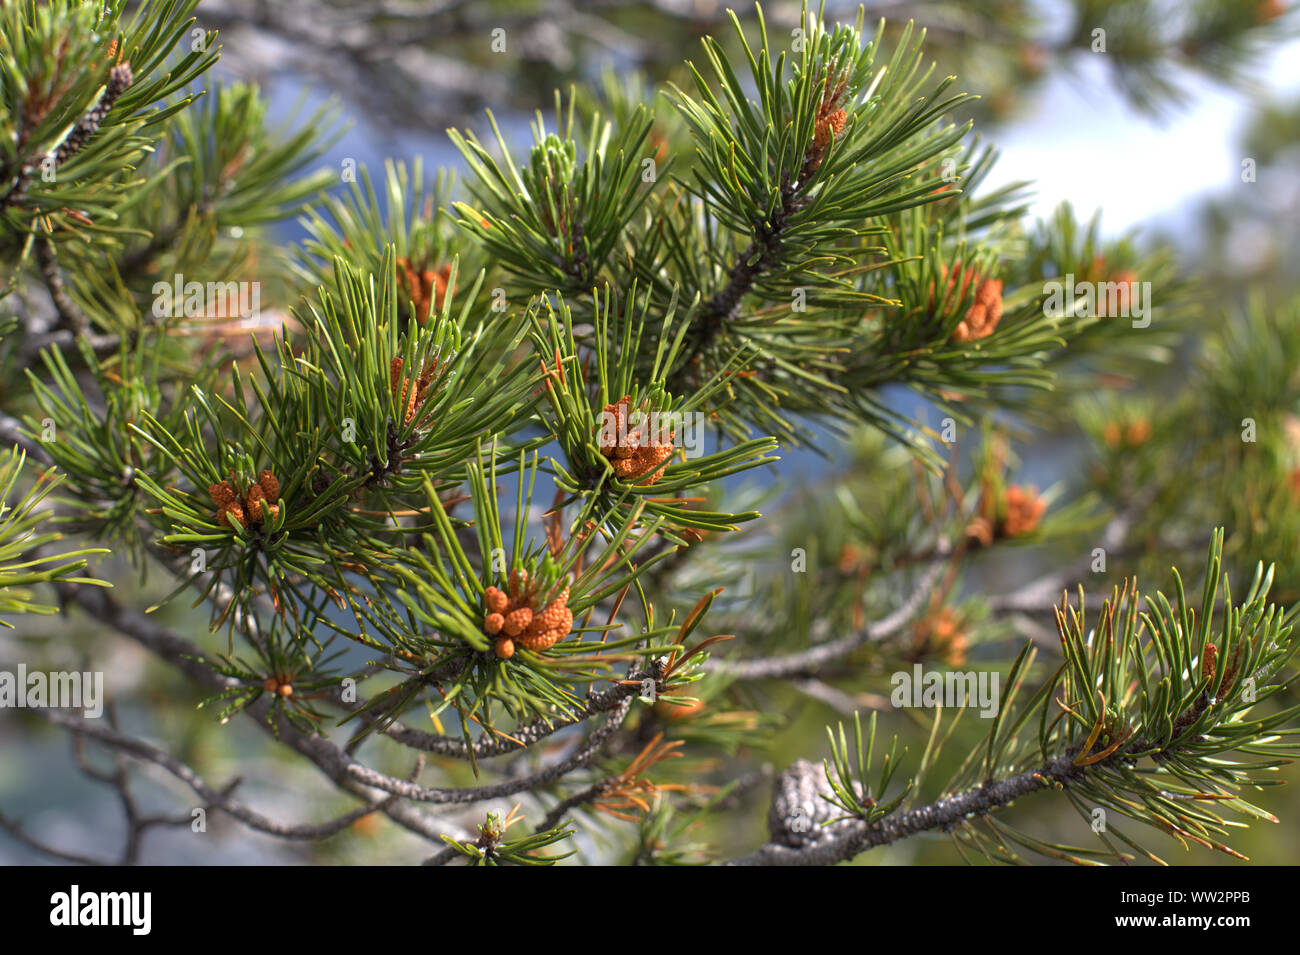 Cloesup of pine pollen and green needles from the lodgepole pine (Pinus contorta) found in subalpine climate in the mountains of British Columbia Stock Photo